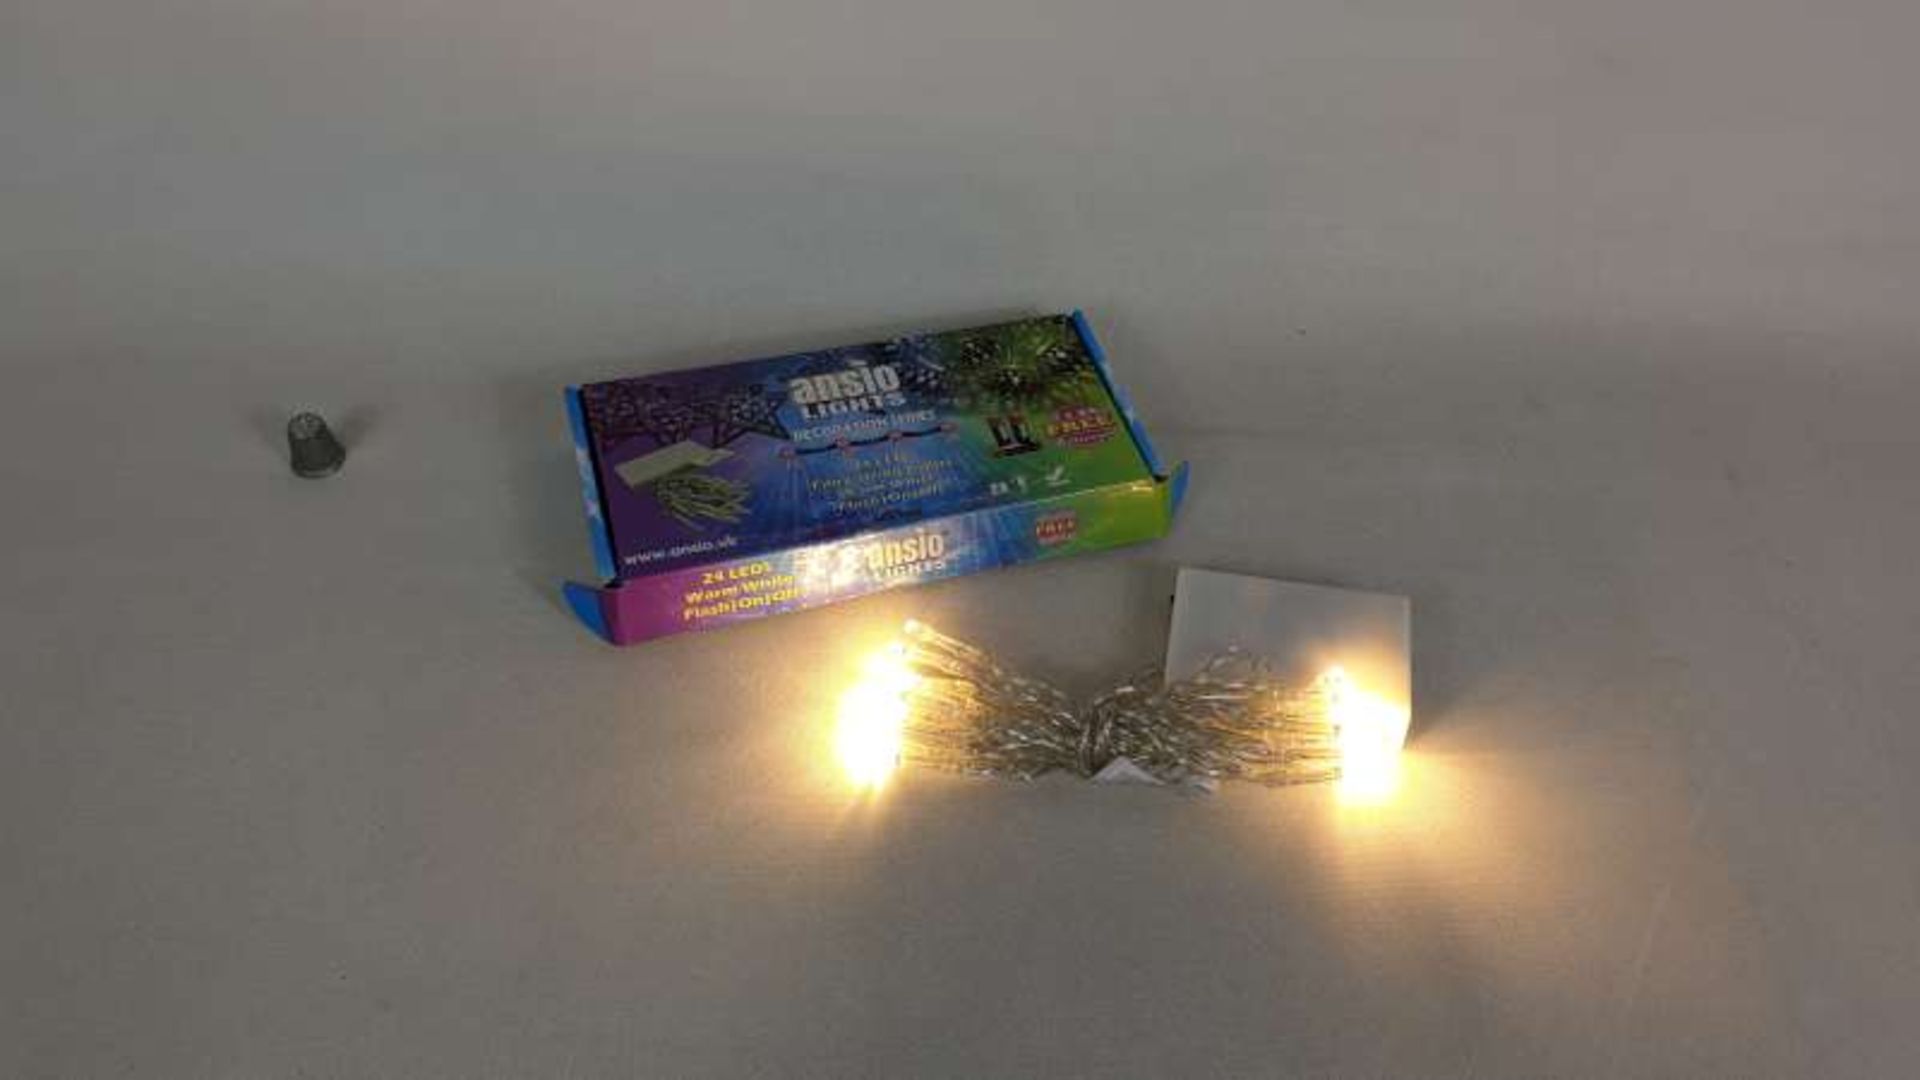 60 X BRAND NEW BOXED 24 LED BATTERY OPERATED CHRISTMAS FAIRY LIGHTS IN 1 BOX